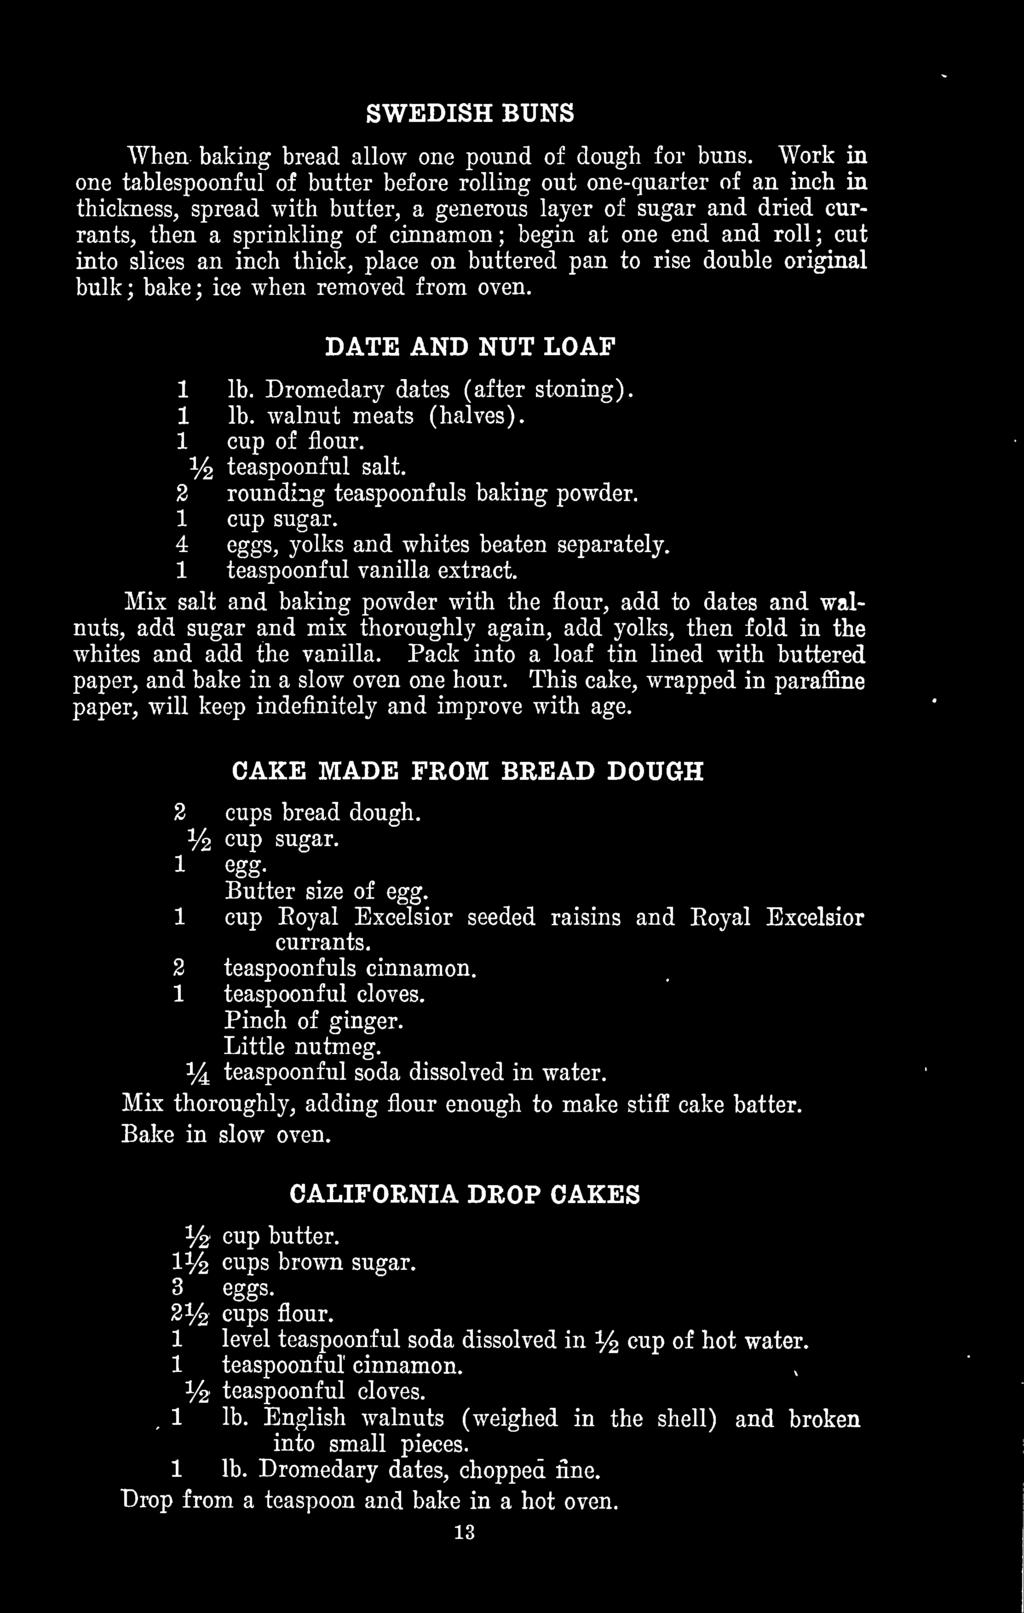 one end and roll; cut into slices an inch thick, place on buttered pan to rise double original bulk; bake; ice when removed from oven. DATE AND NUT LOAF 1 Ib. Dromedary dates (after stoning). 1 Ib. walnut meats (halves).